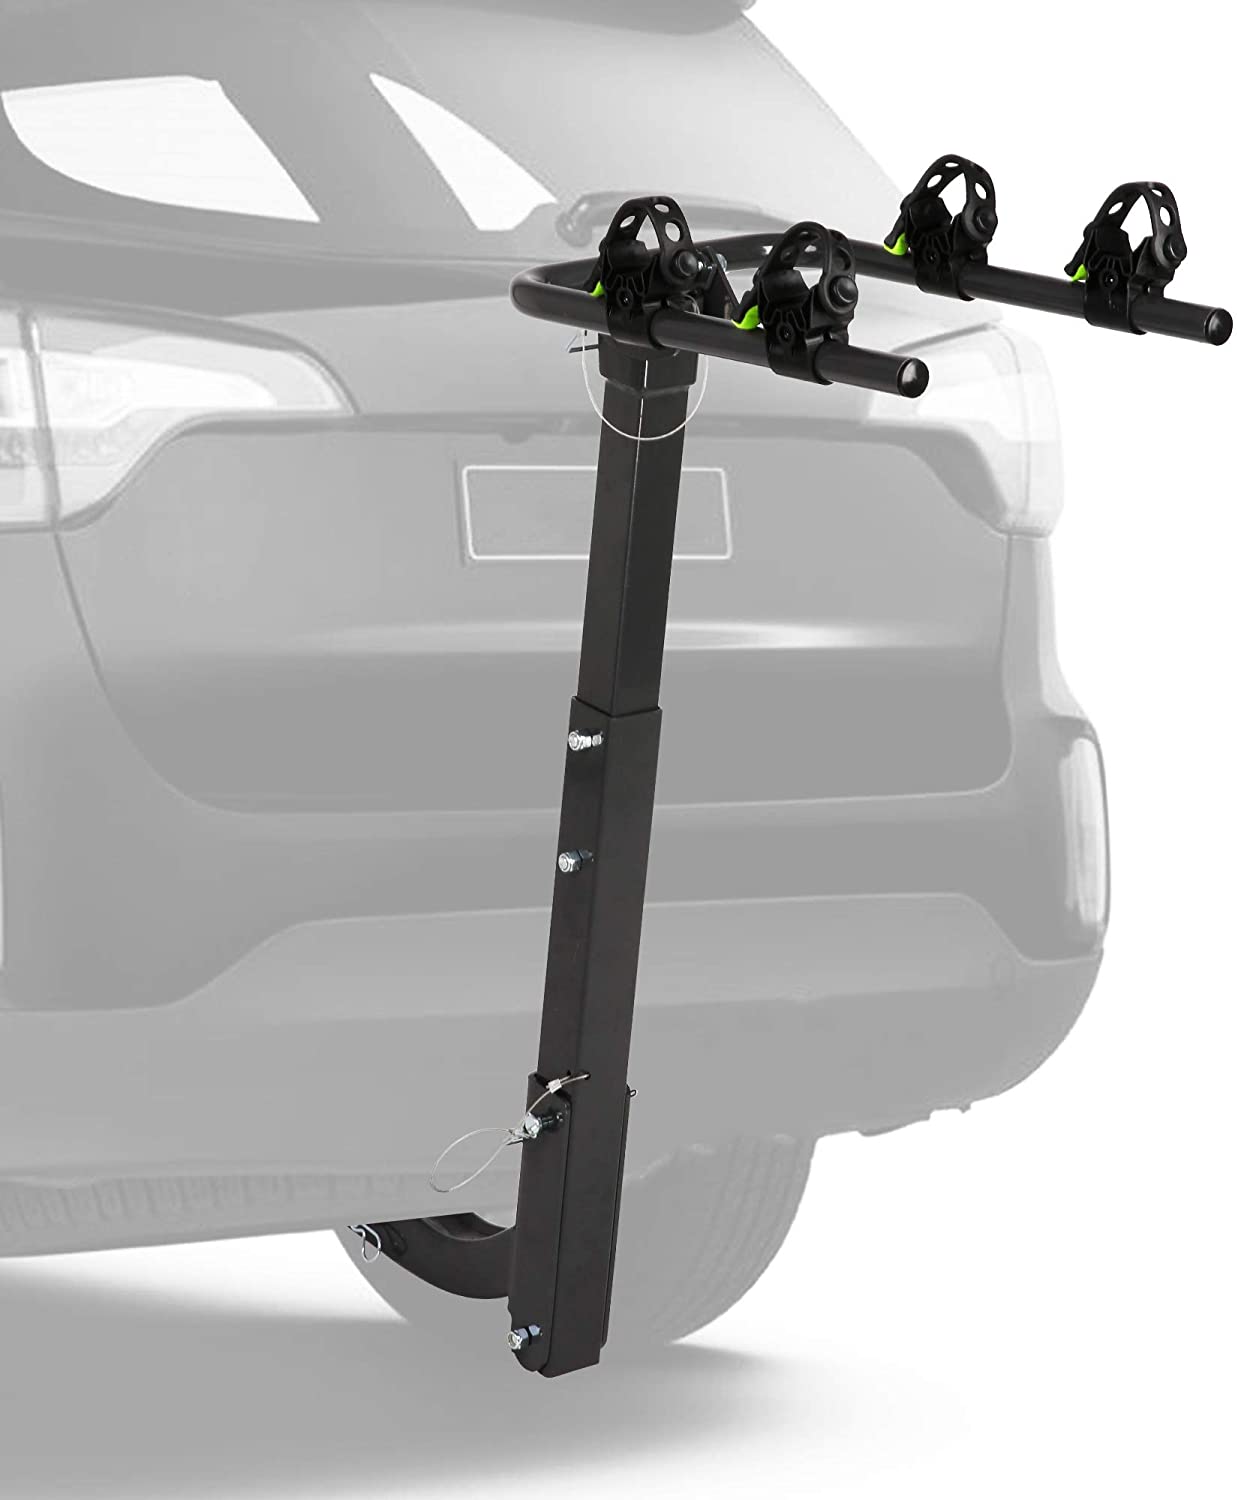 Bike Rack for Car Rack 2-Bike Hitch Mount Bicycle Rack for SUV with 2-Inch Receiver, Rubber Lock & Sleek Pad